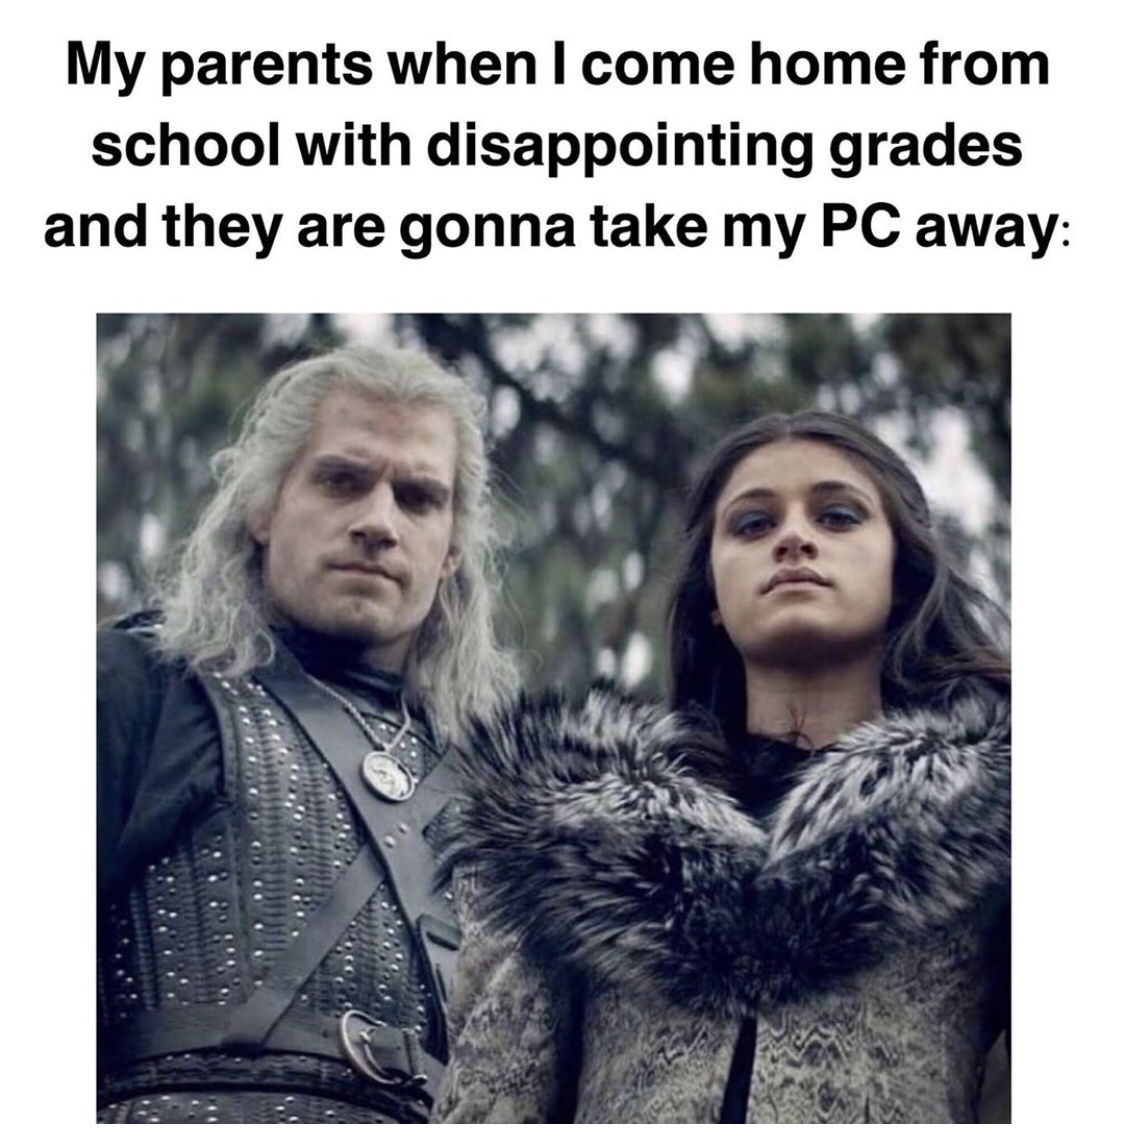 friendship - My parents when I come home from school with disappointing grades and they are gonna take my Pc away